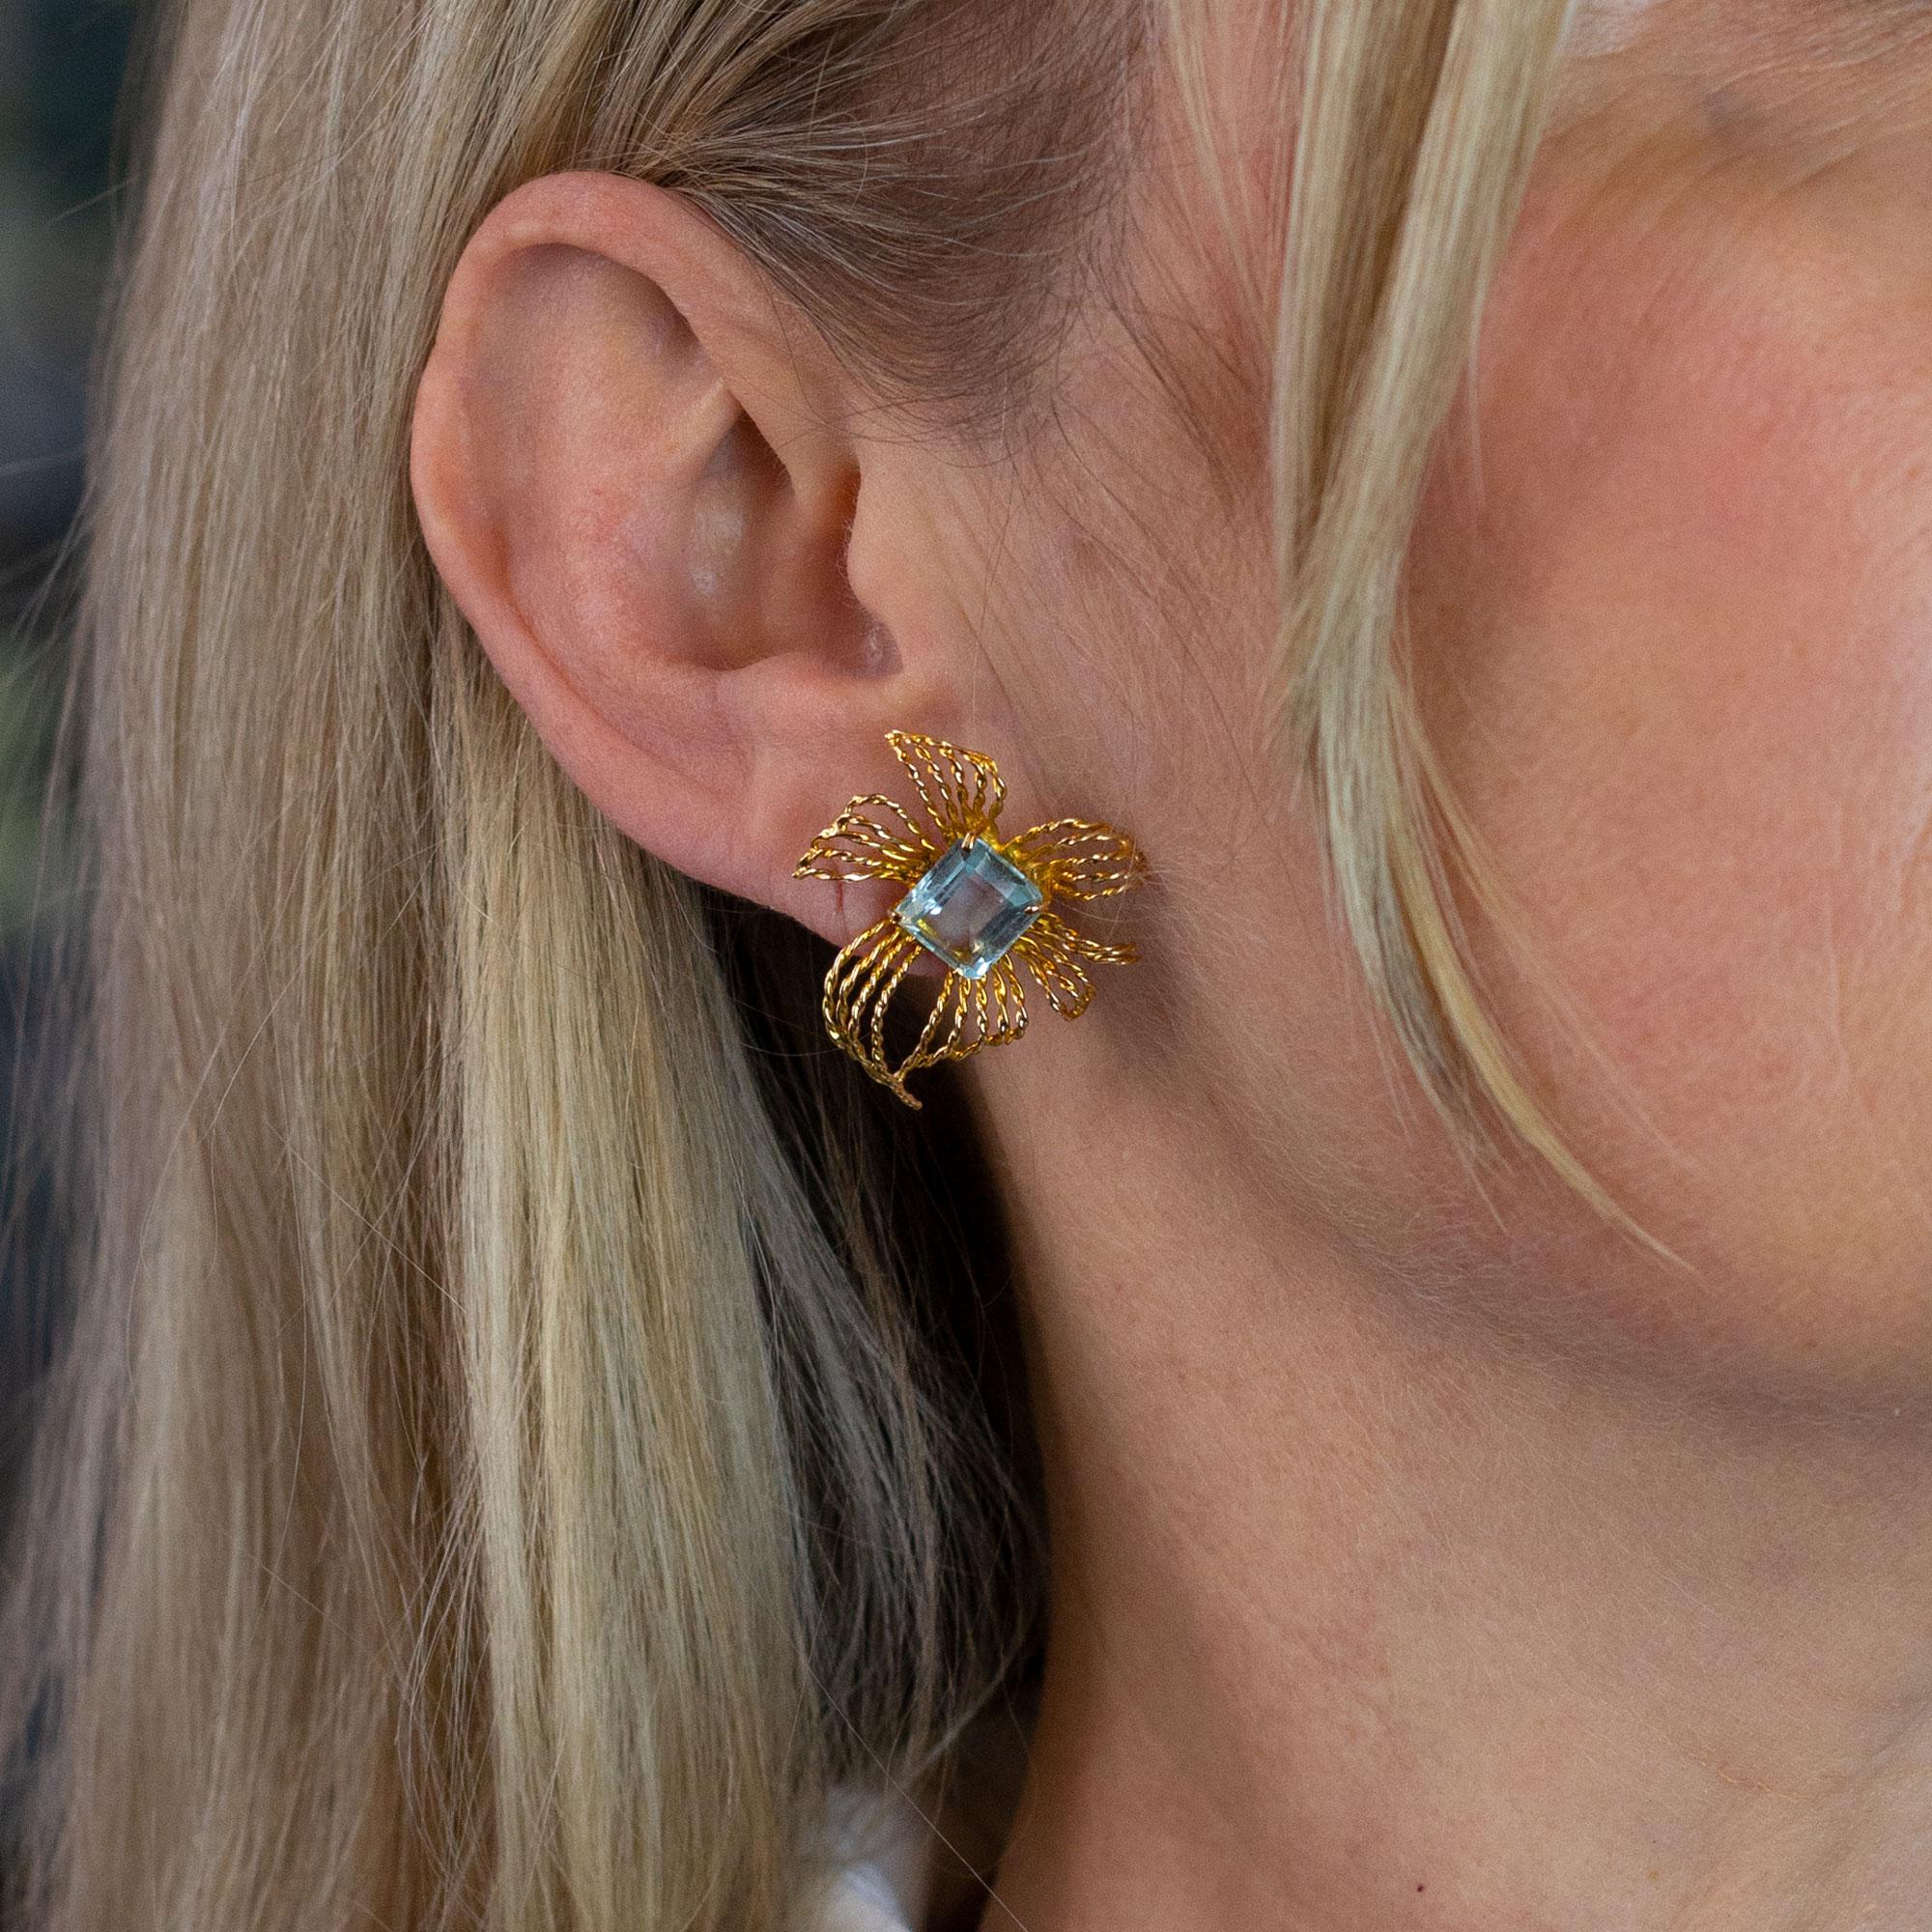 A very fine pair of Retro period aquamarine and gold earrings. These earrings are crafted from 10 karat yellow gold and are each set with a 2.4 carat octagonal cut aquamarine. The posts on this pair are threaded (screw on) so that they remain